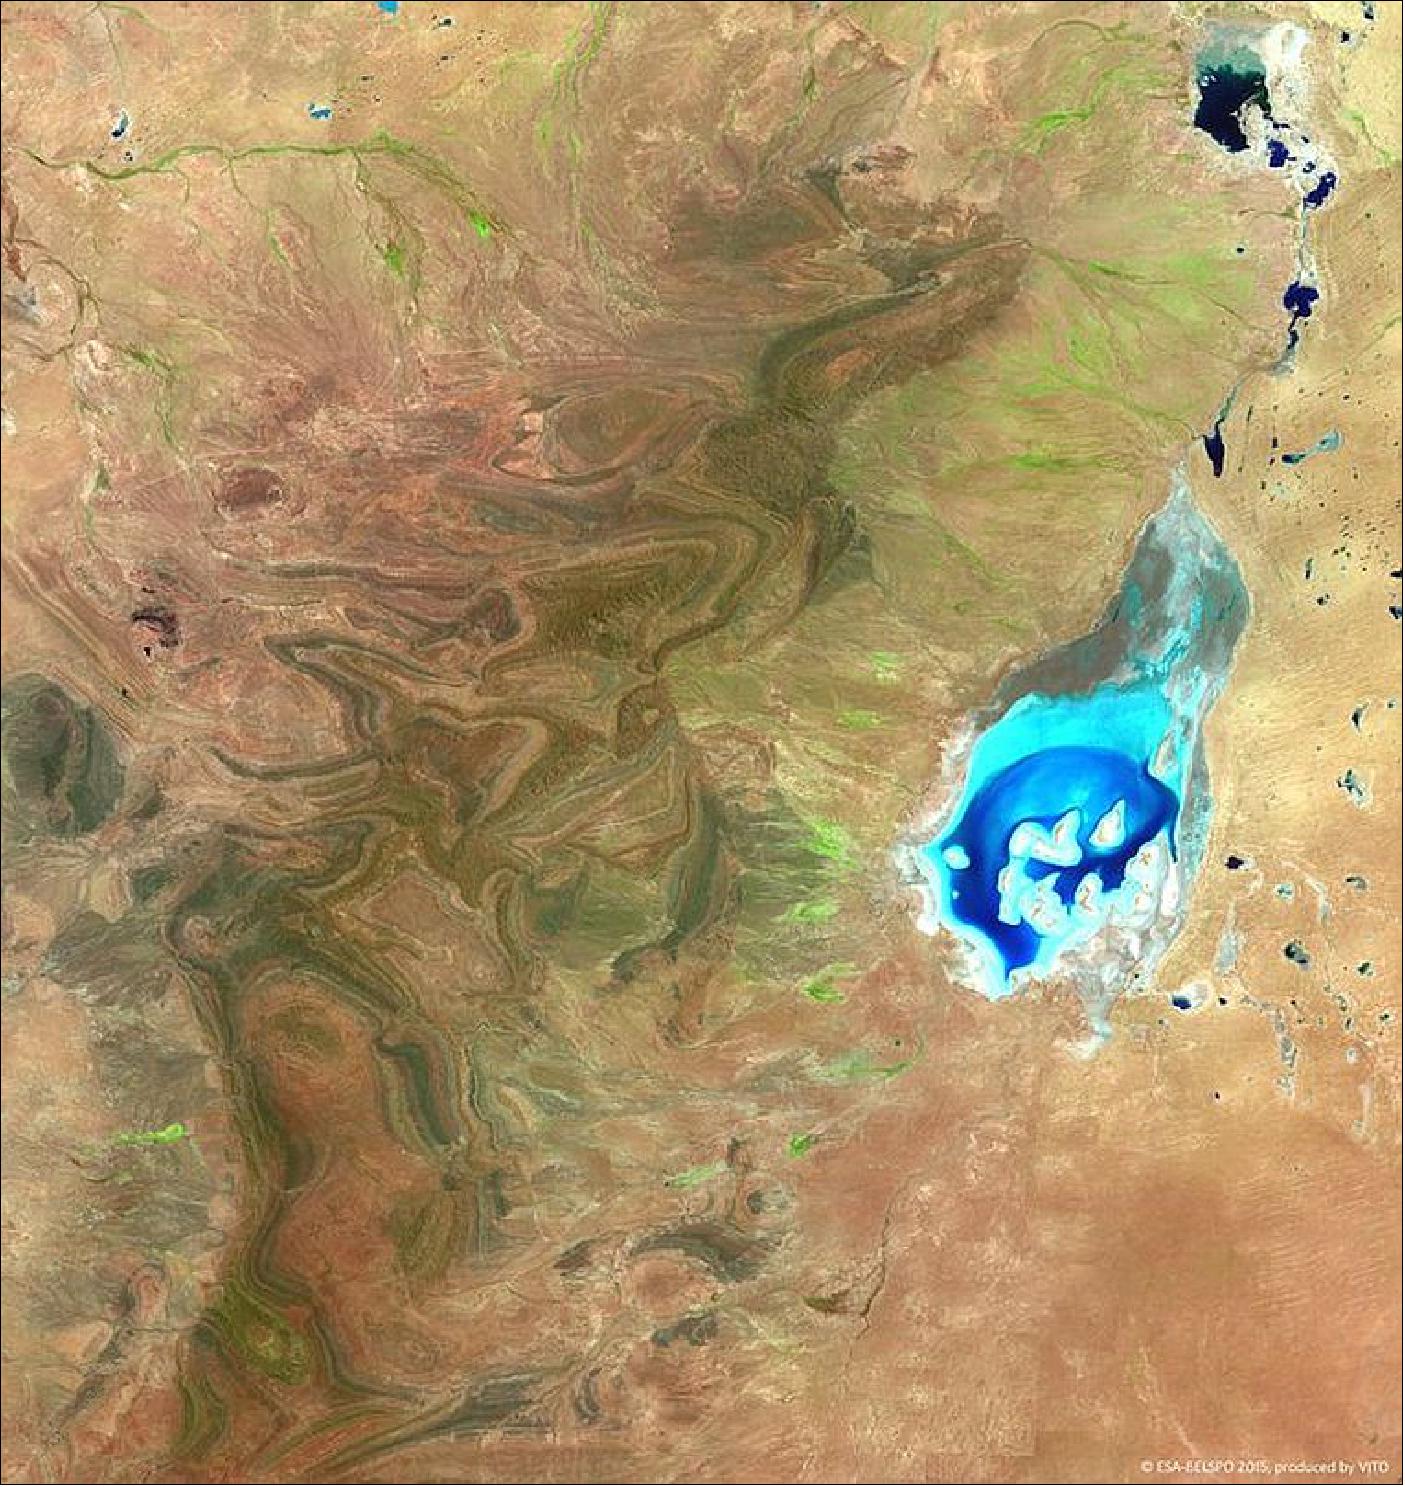 Figure 54: Lake Frome in South Australia as acquired by PROBA-V on Feb. 12, 2015 (image credit: ESA, VITO)